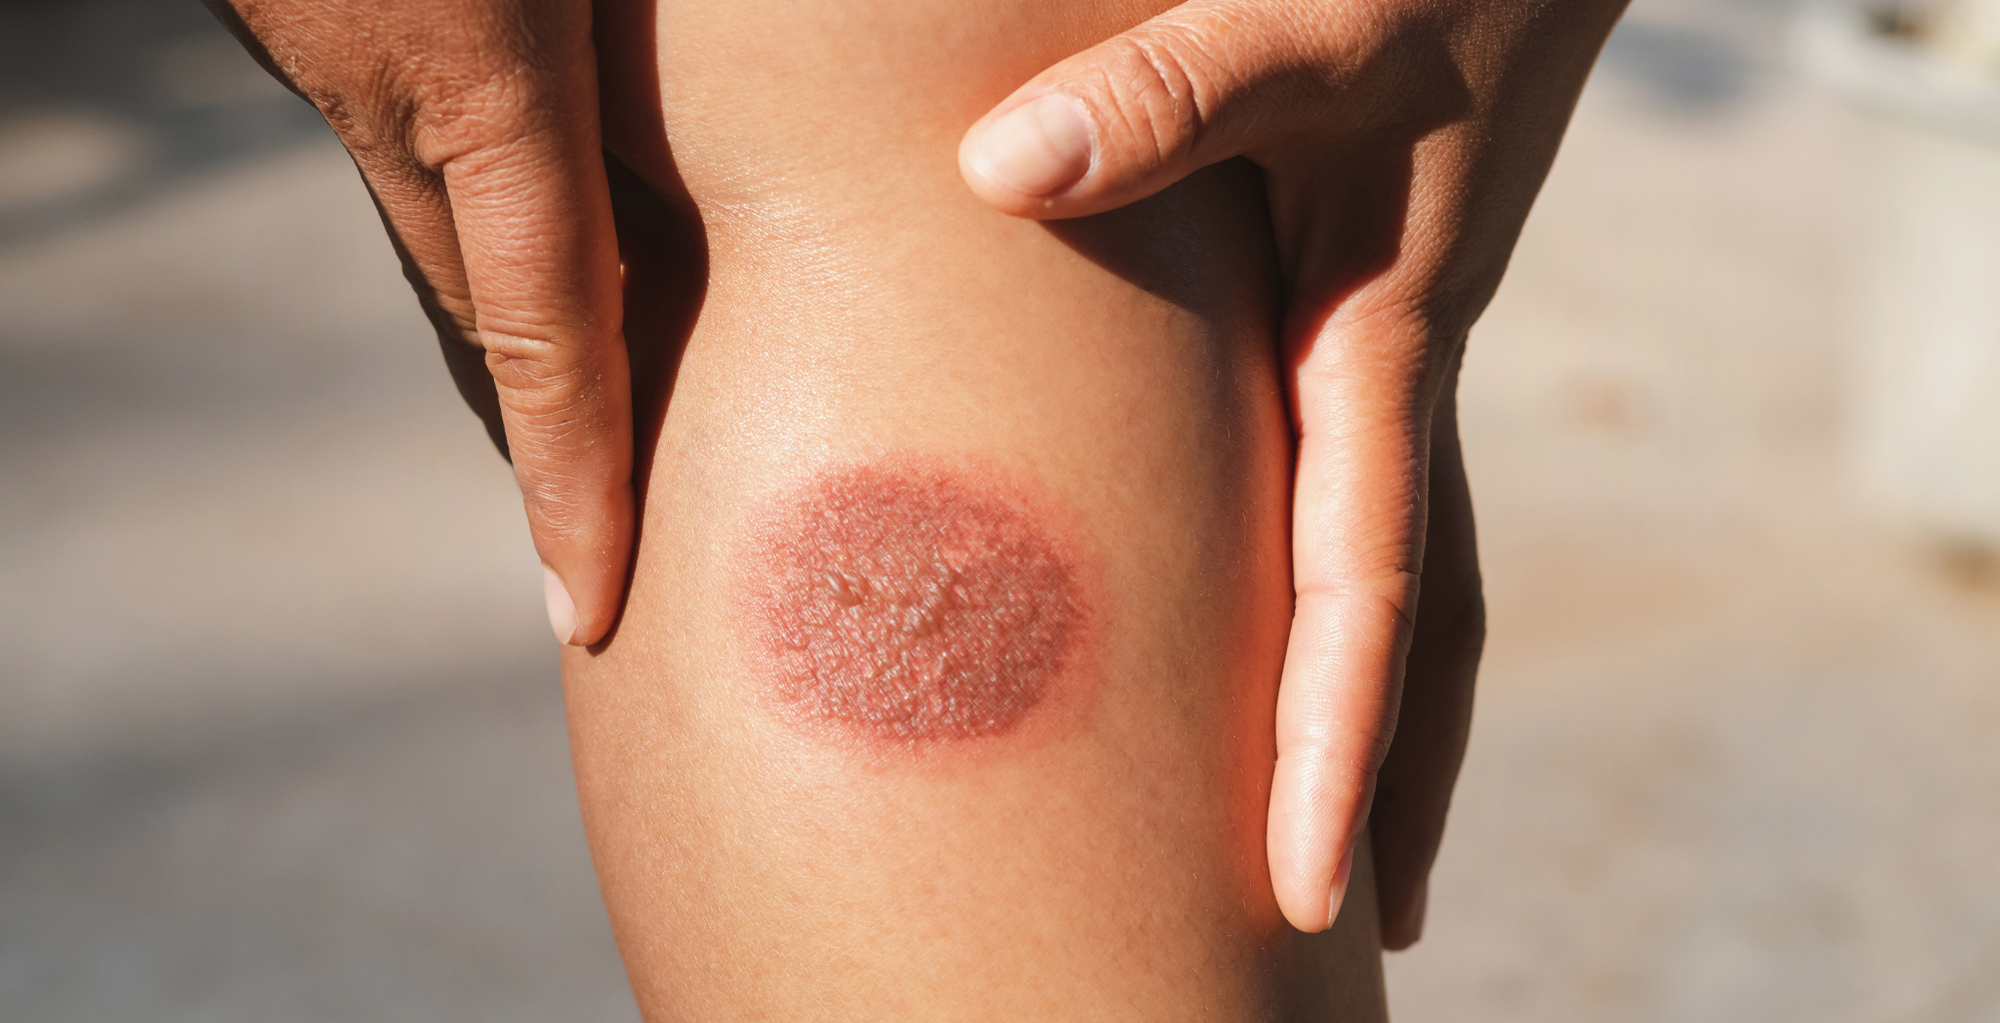 Dealing with Burn Injuries: First Aid and Effective Treatment